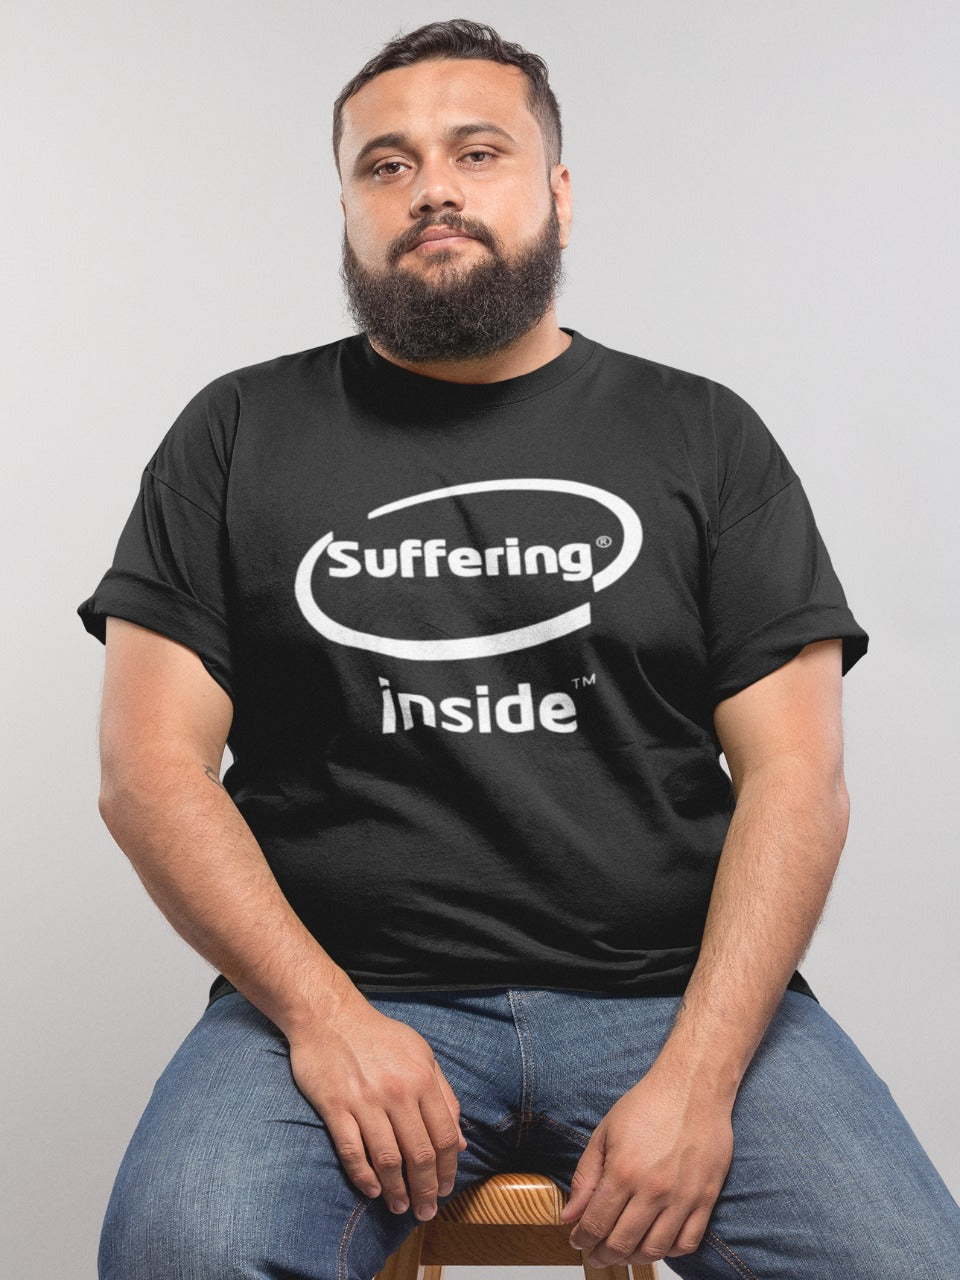 Add some humor to your wardrobe with our picture of a fun-loving guy wearing our black "Suffering Inside" t-shirt. Featuring a graphic design inspired by the popular meme and Intel Inside logo, this edgy shirt is perfect for making a statement and showing off your love for internet culture. Order now and join the trendsetting meme enthusiasts!